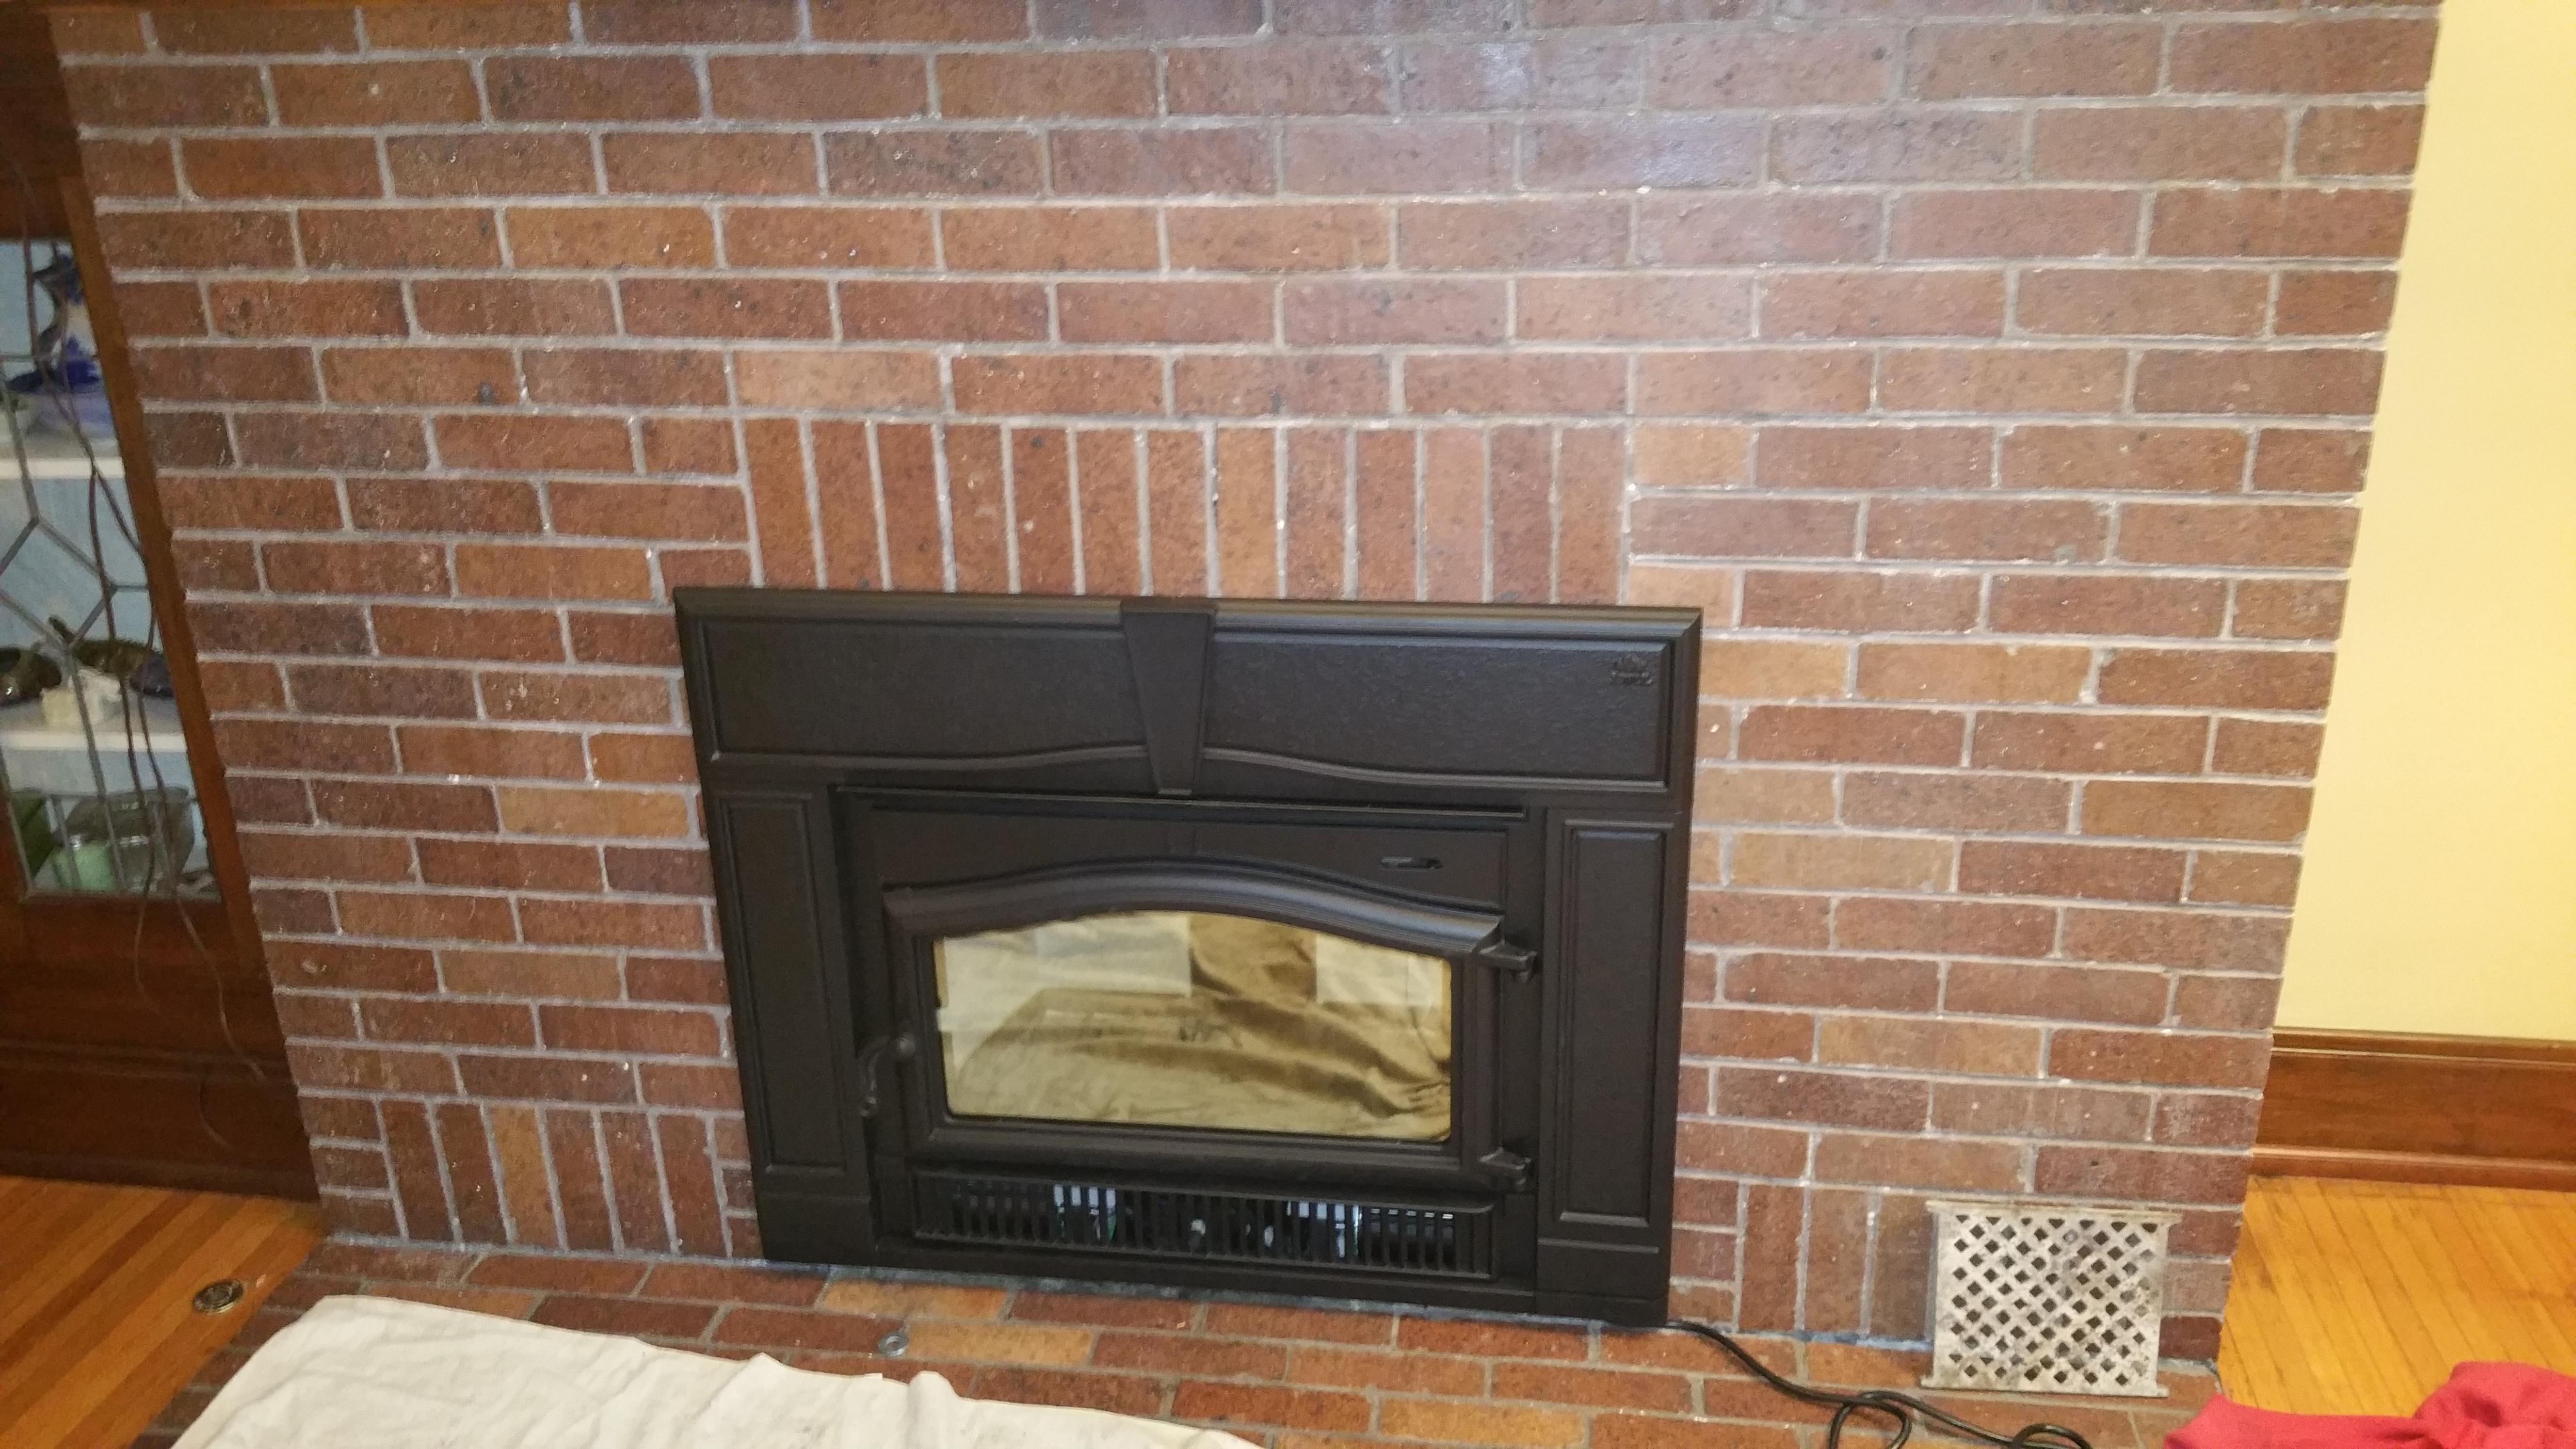 Dave and I installed this wood burning insert into an existing masonry fireplace and added a stainless steel chimney liner